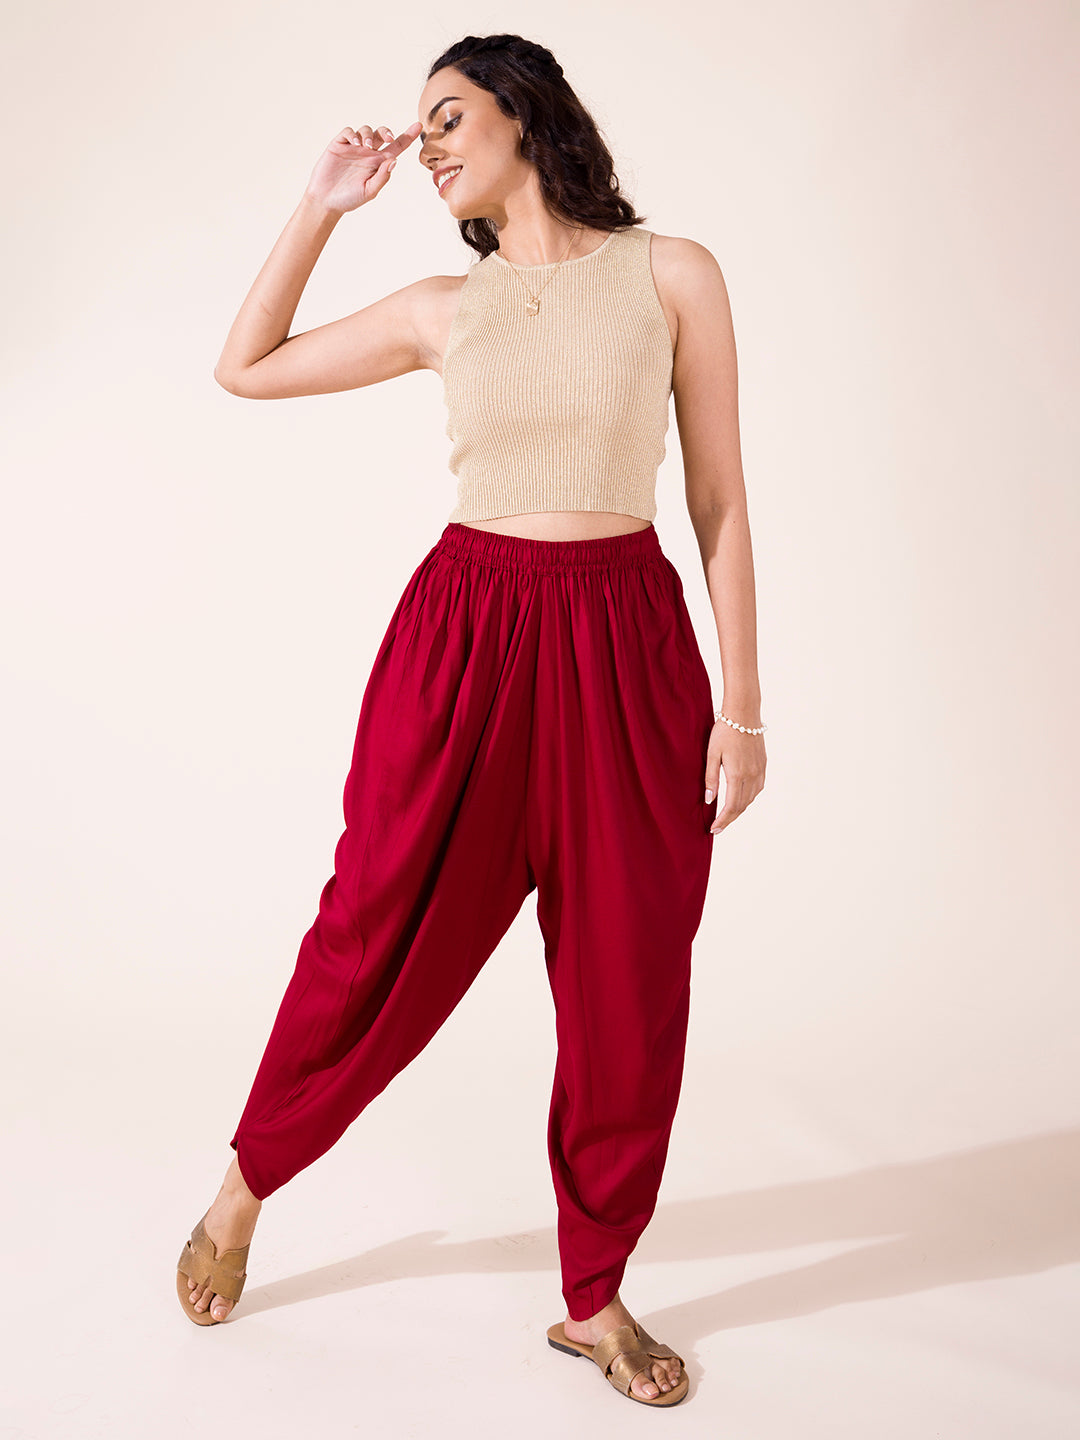 Buy Present Relaxed Yoga Fitness Active and Dance Wear Dhoti Pants for  Women Free Size (28 Till 34) Printed Dhoti Maroon Color at Amazon.in